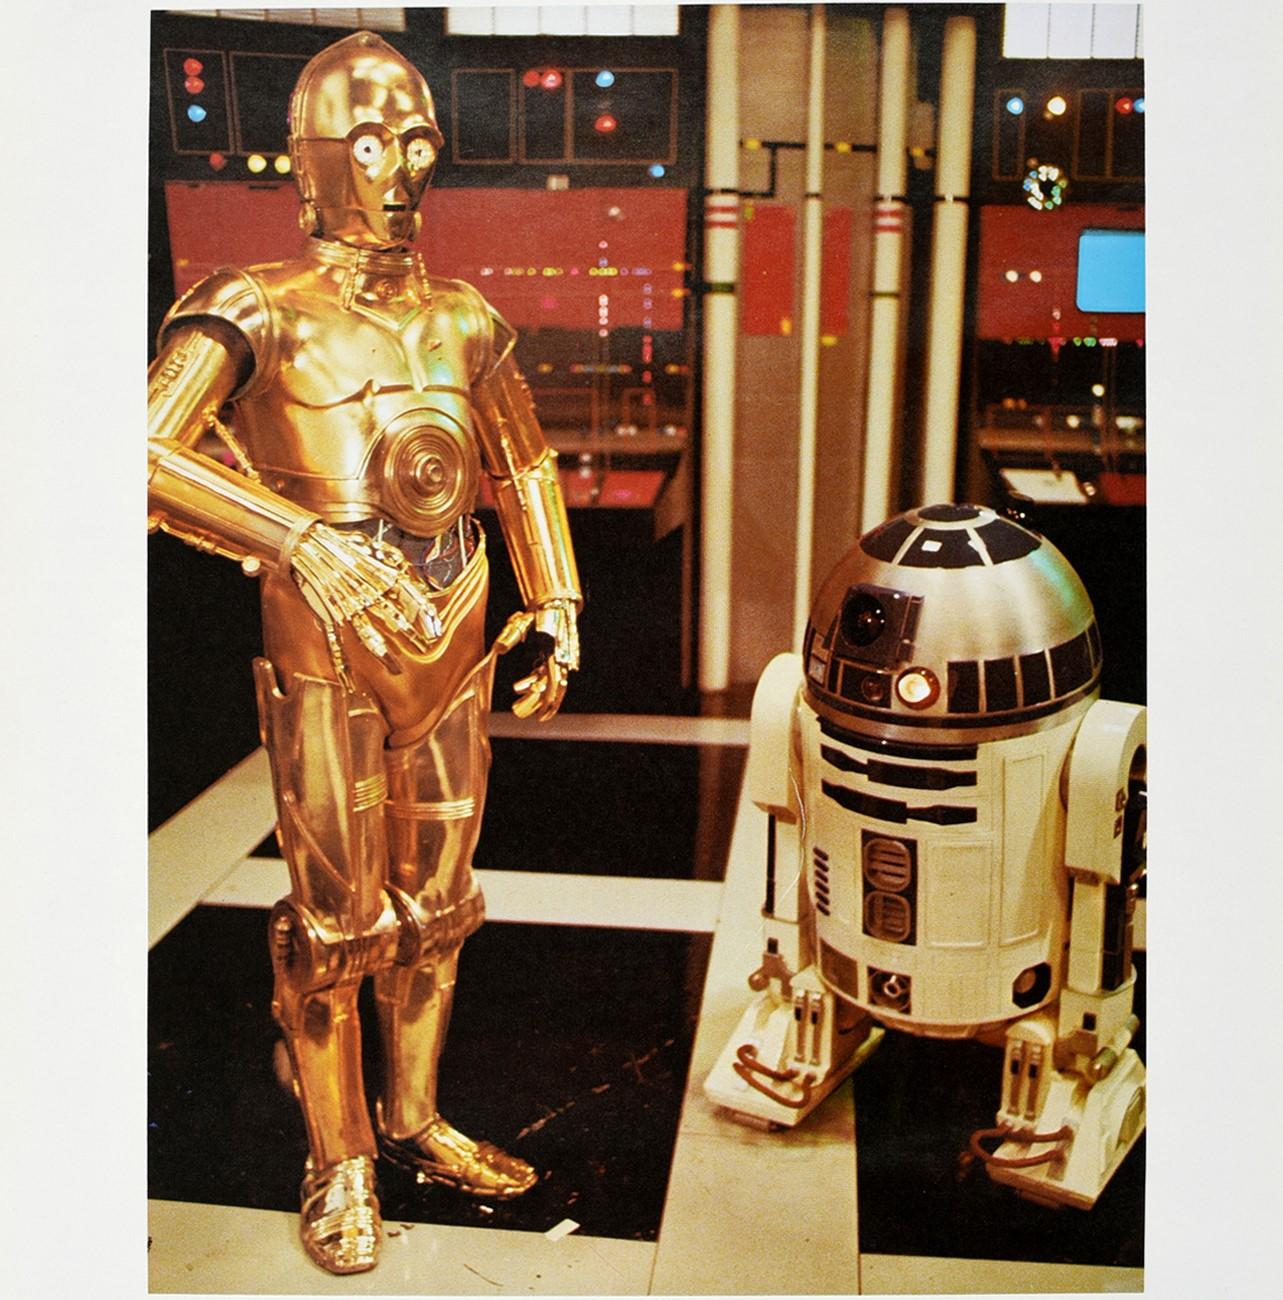 Original vintage public health poster featuring the popular sci-fi Star Wars droid characters C-3PO (played by Anthony Daniels) and R2-D2 (played by Kenny Baker) from the 1977 science fiction film saga created by George Lucas - Parents of Earth, are